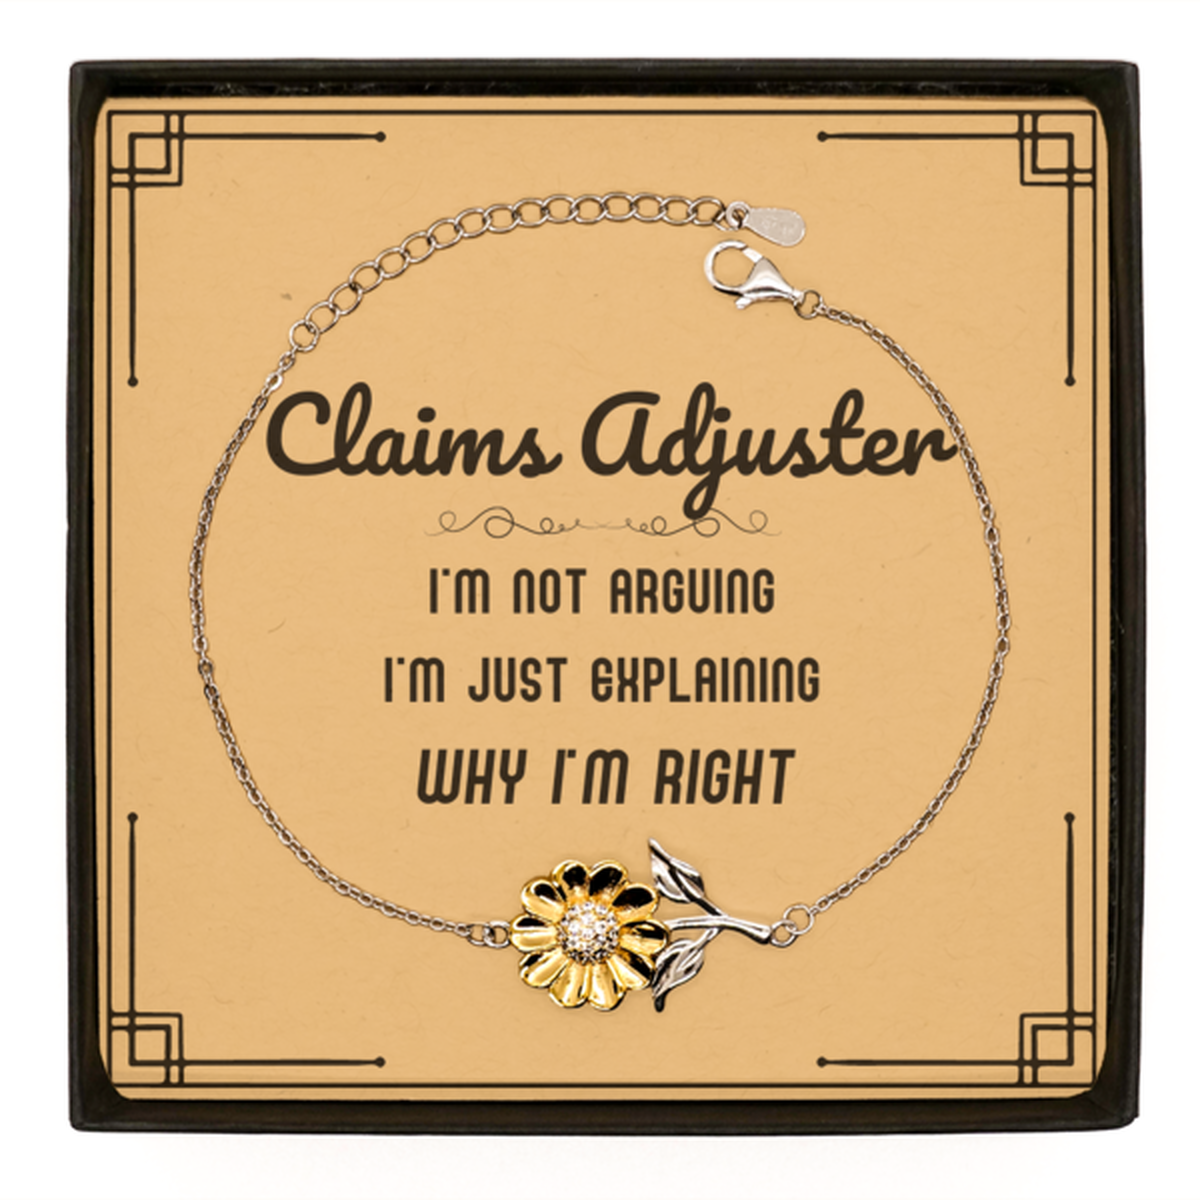 Claims Adjuster I'm not Arguing. I'm Just Explaining Why I'm RIGHT Sunflower Bracelet, Funny Saying Quote Claims Adjuster Gifts For Claims Adjuster Message Card Graduation Birthday Christmas Gifts for Men Women Coworker